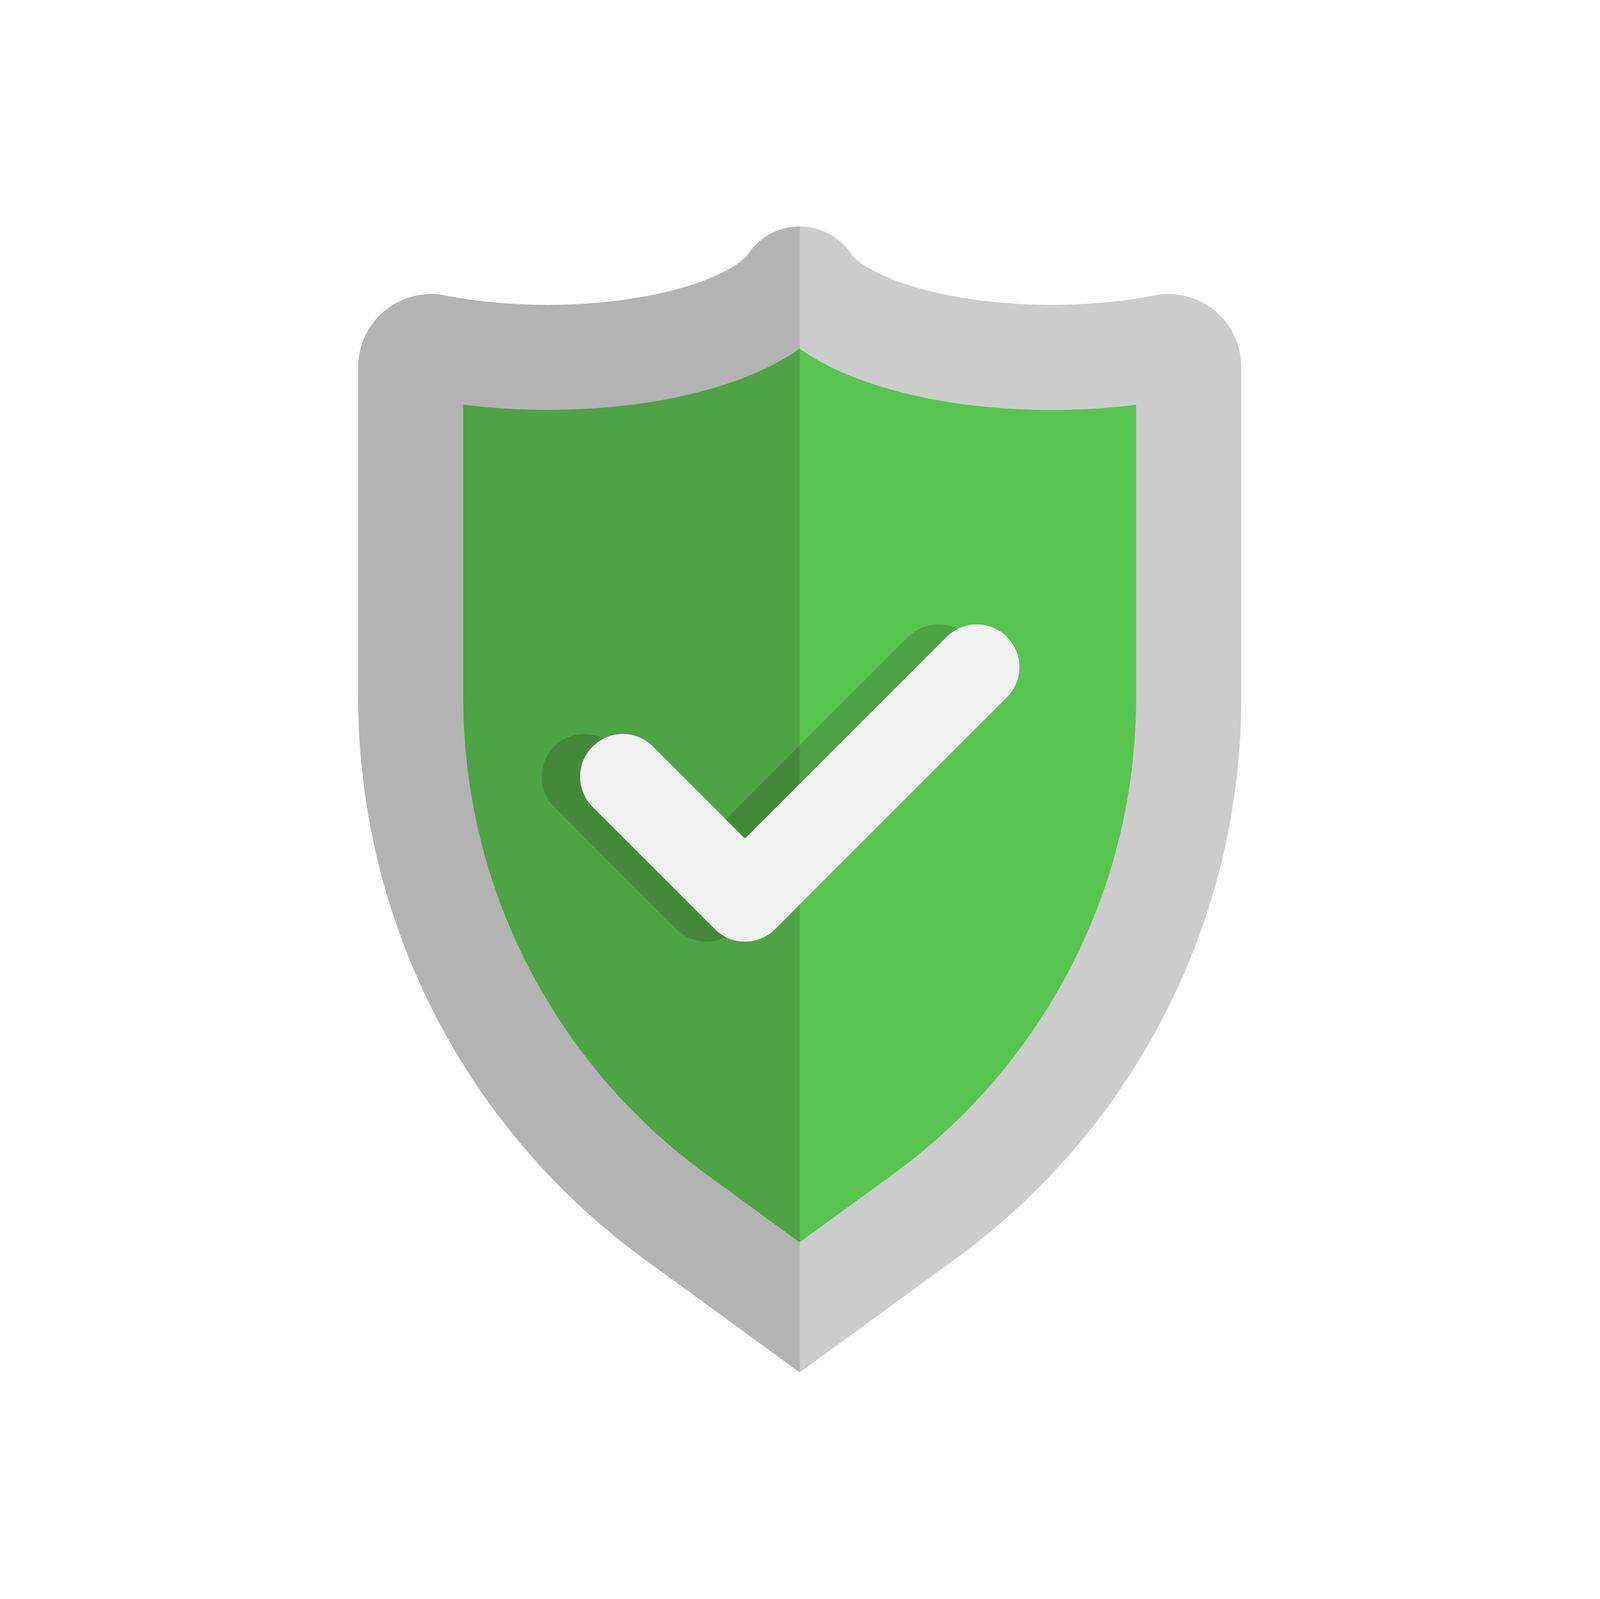 Green approval shield vector icon on white background